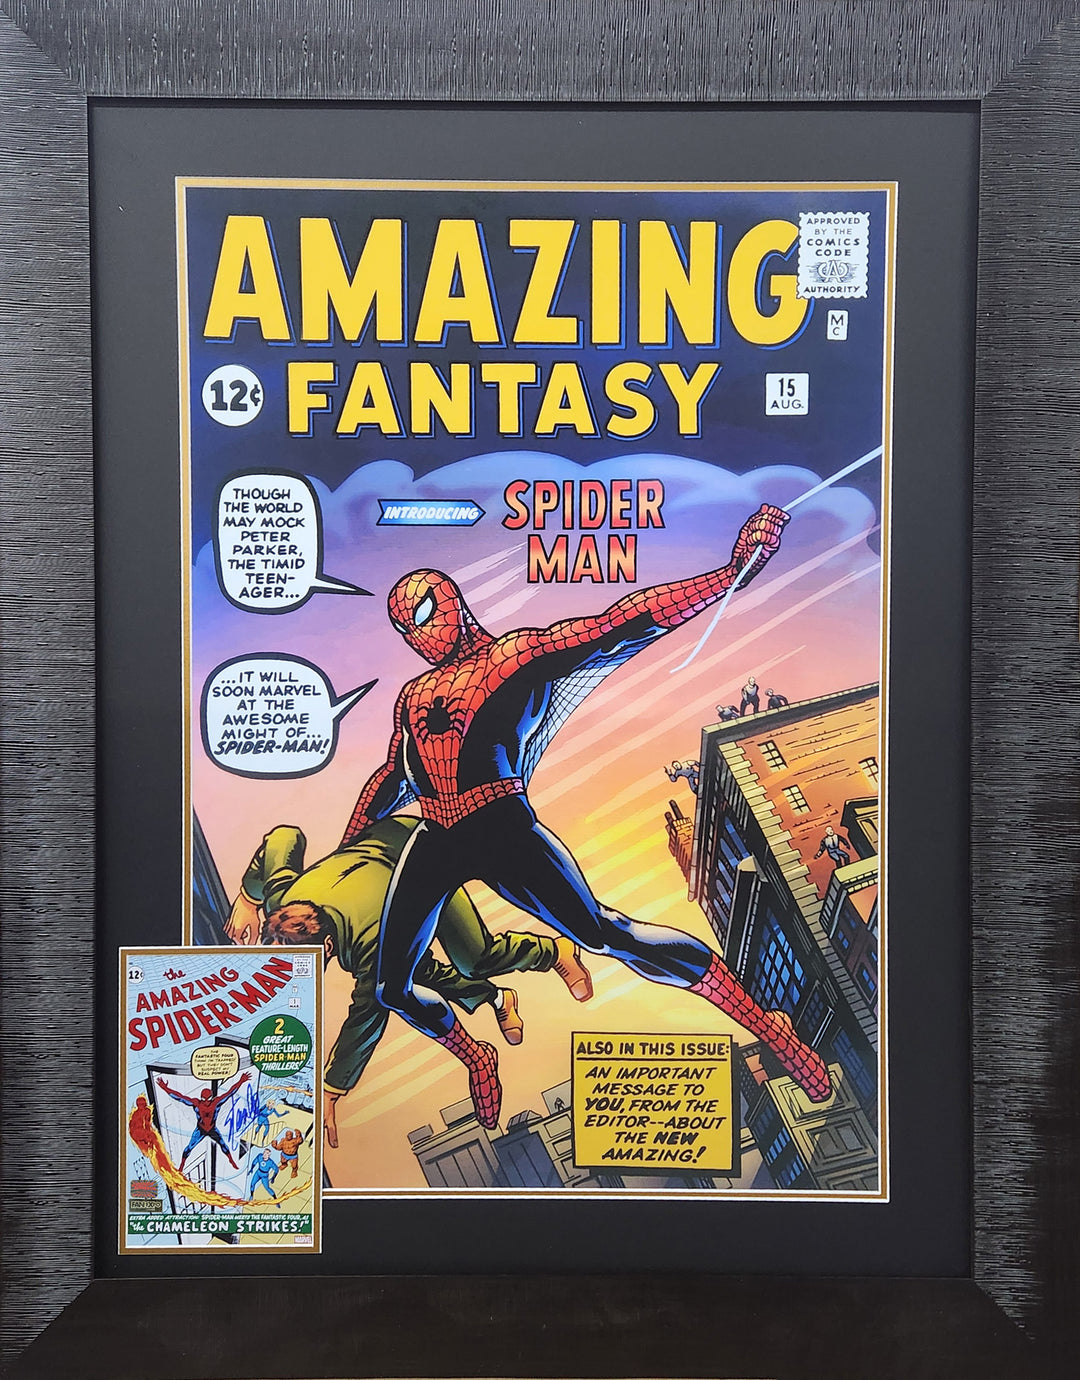 Spider-Man First Appearance Framed Print Signed By Stan Lee, Marvel, Pop Culture Art, Comics, Autographed, Signed, AAOOCC33224